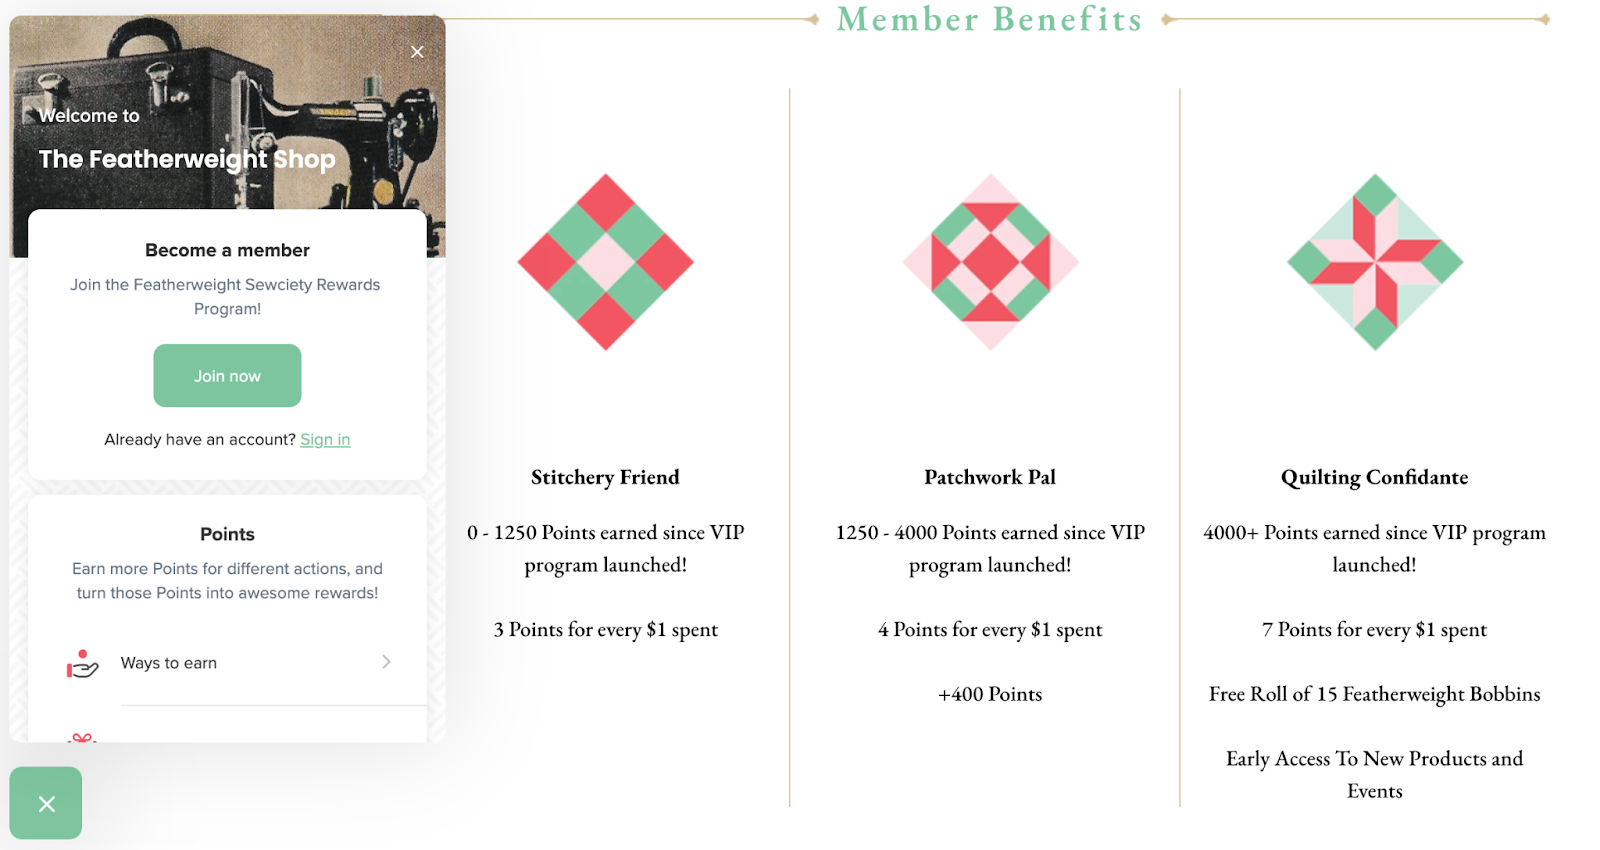 A screenshot of The Singer Featherweight Shop’s rewards program explainer page showing its 3 product-inspired VIP tiers and their benefits. 